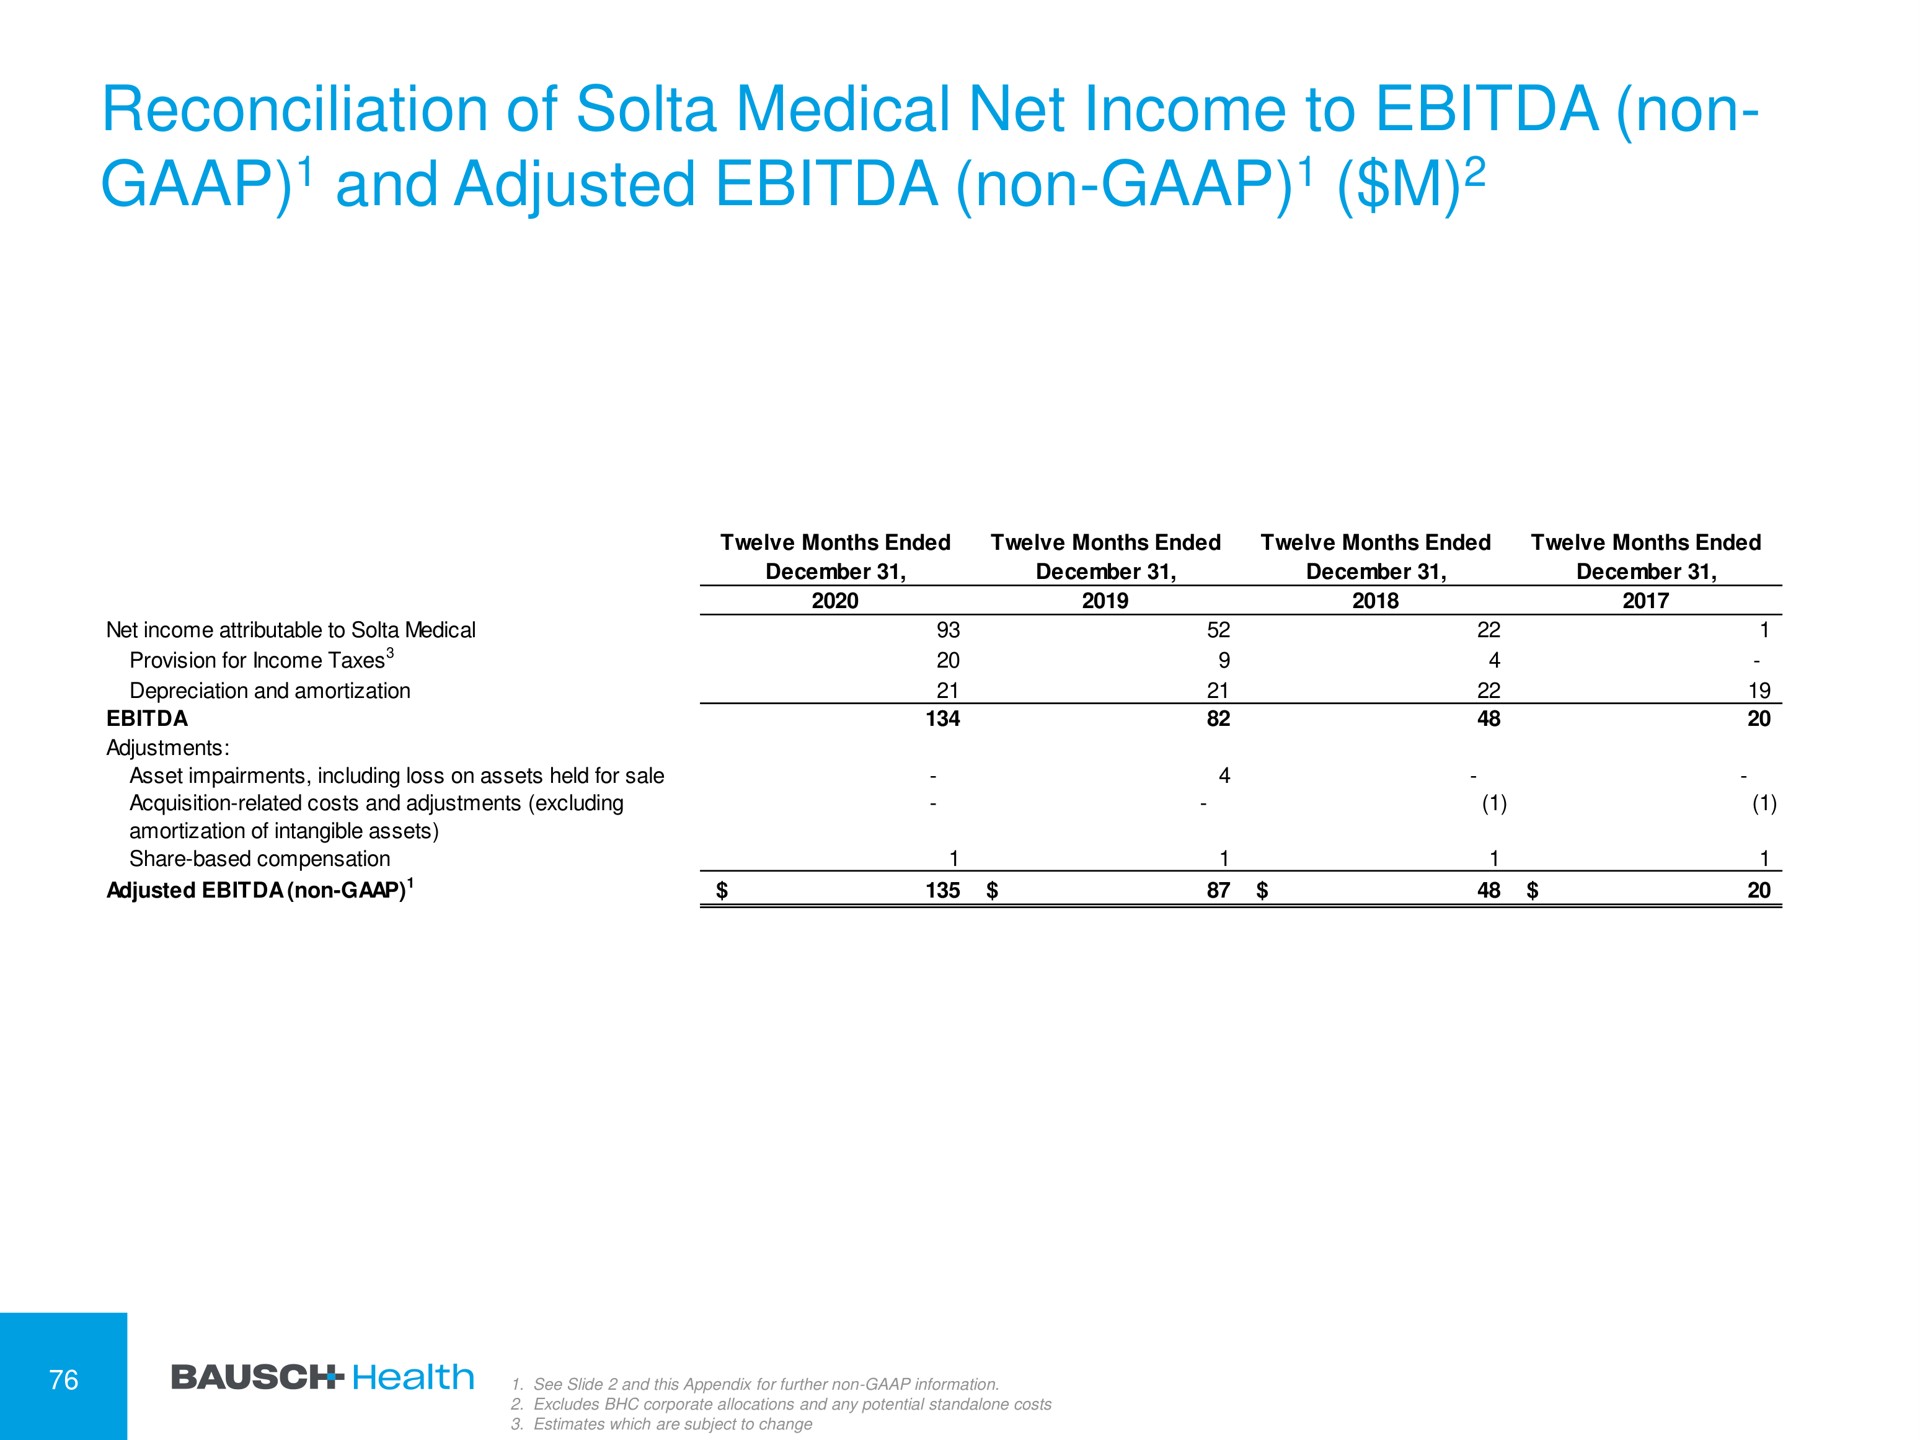 reconciliation of medical net income to non and adjusted non | Bausch Health Companies